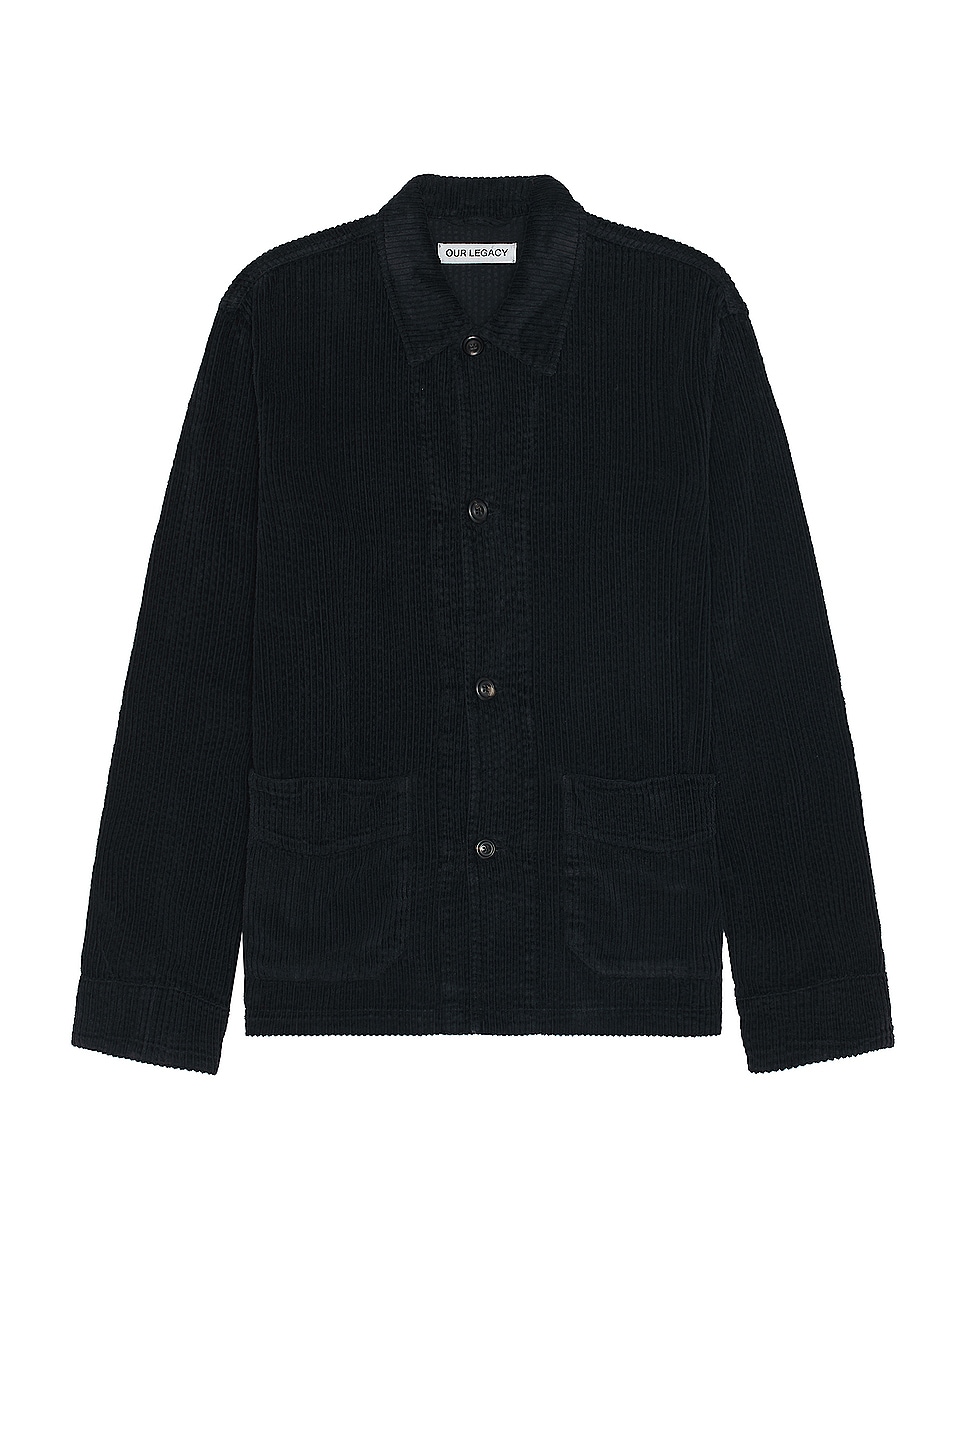 Image 1 of Our Legacy Archive Box Jacket in Worn Black Rustic Cord